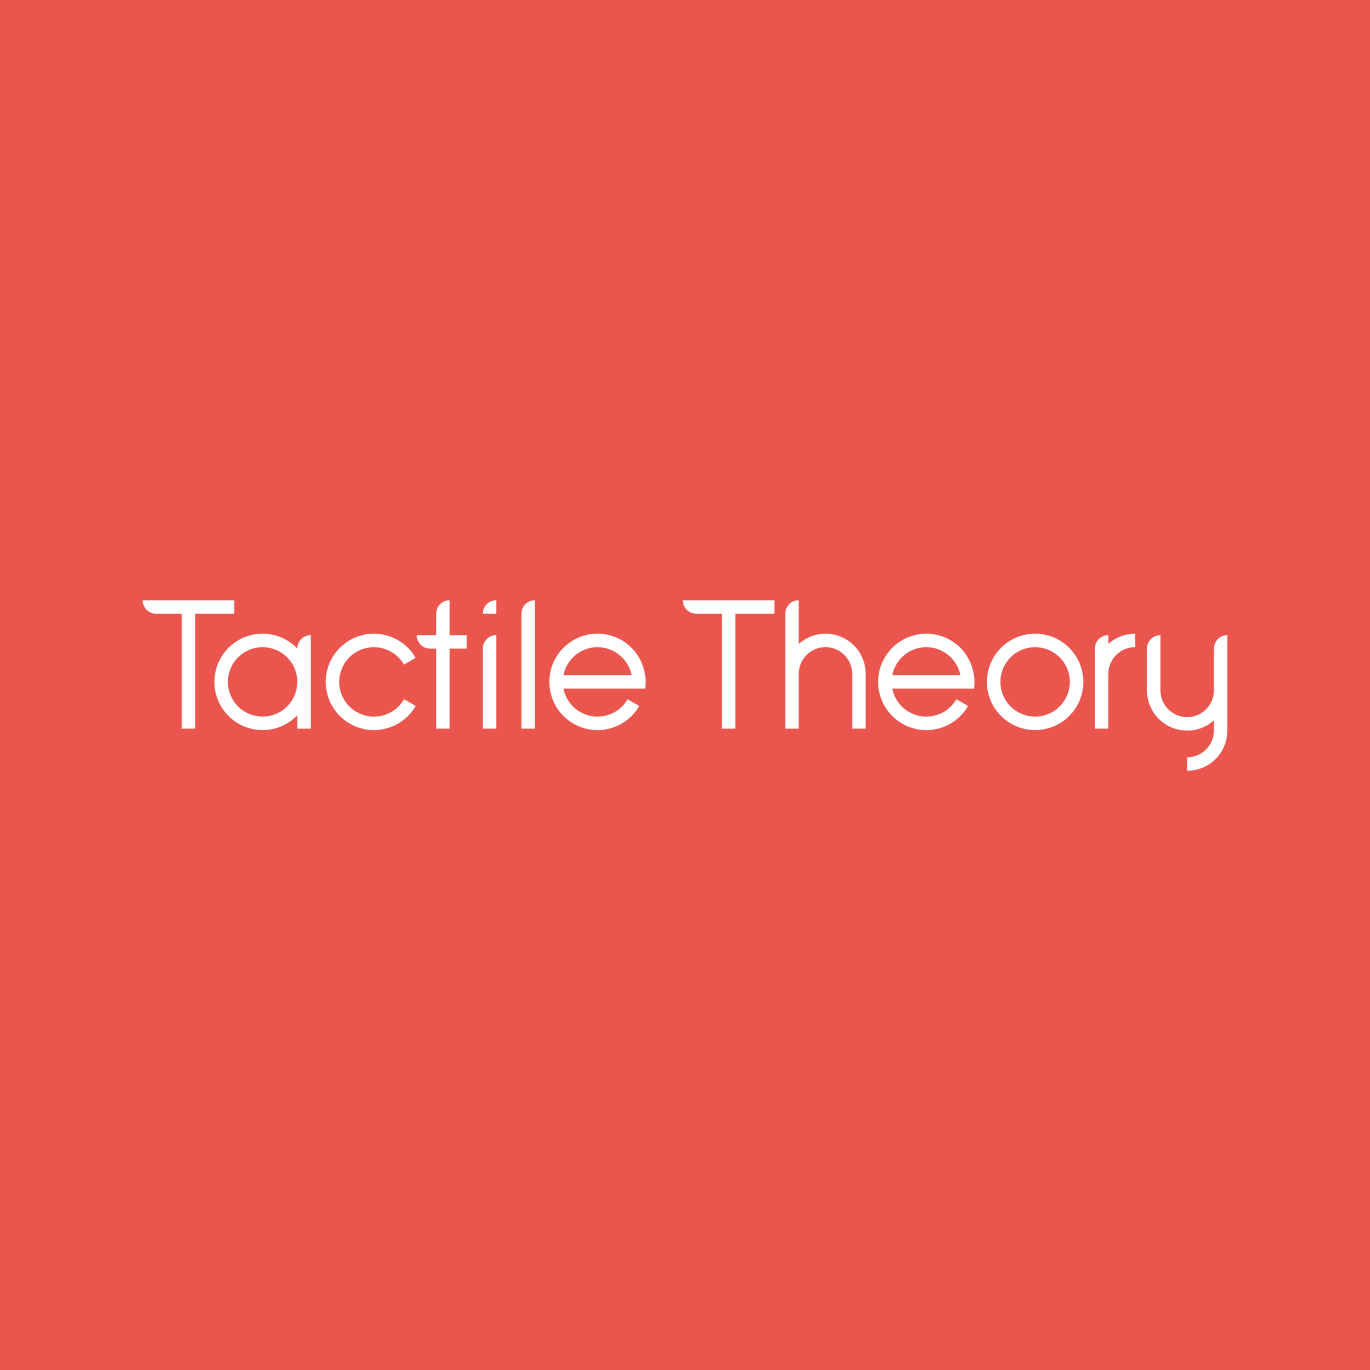 Tactile Theory Branding and Website Design